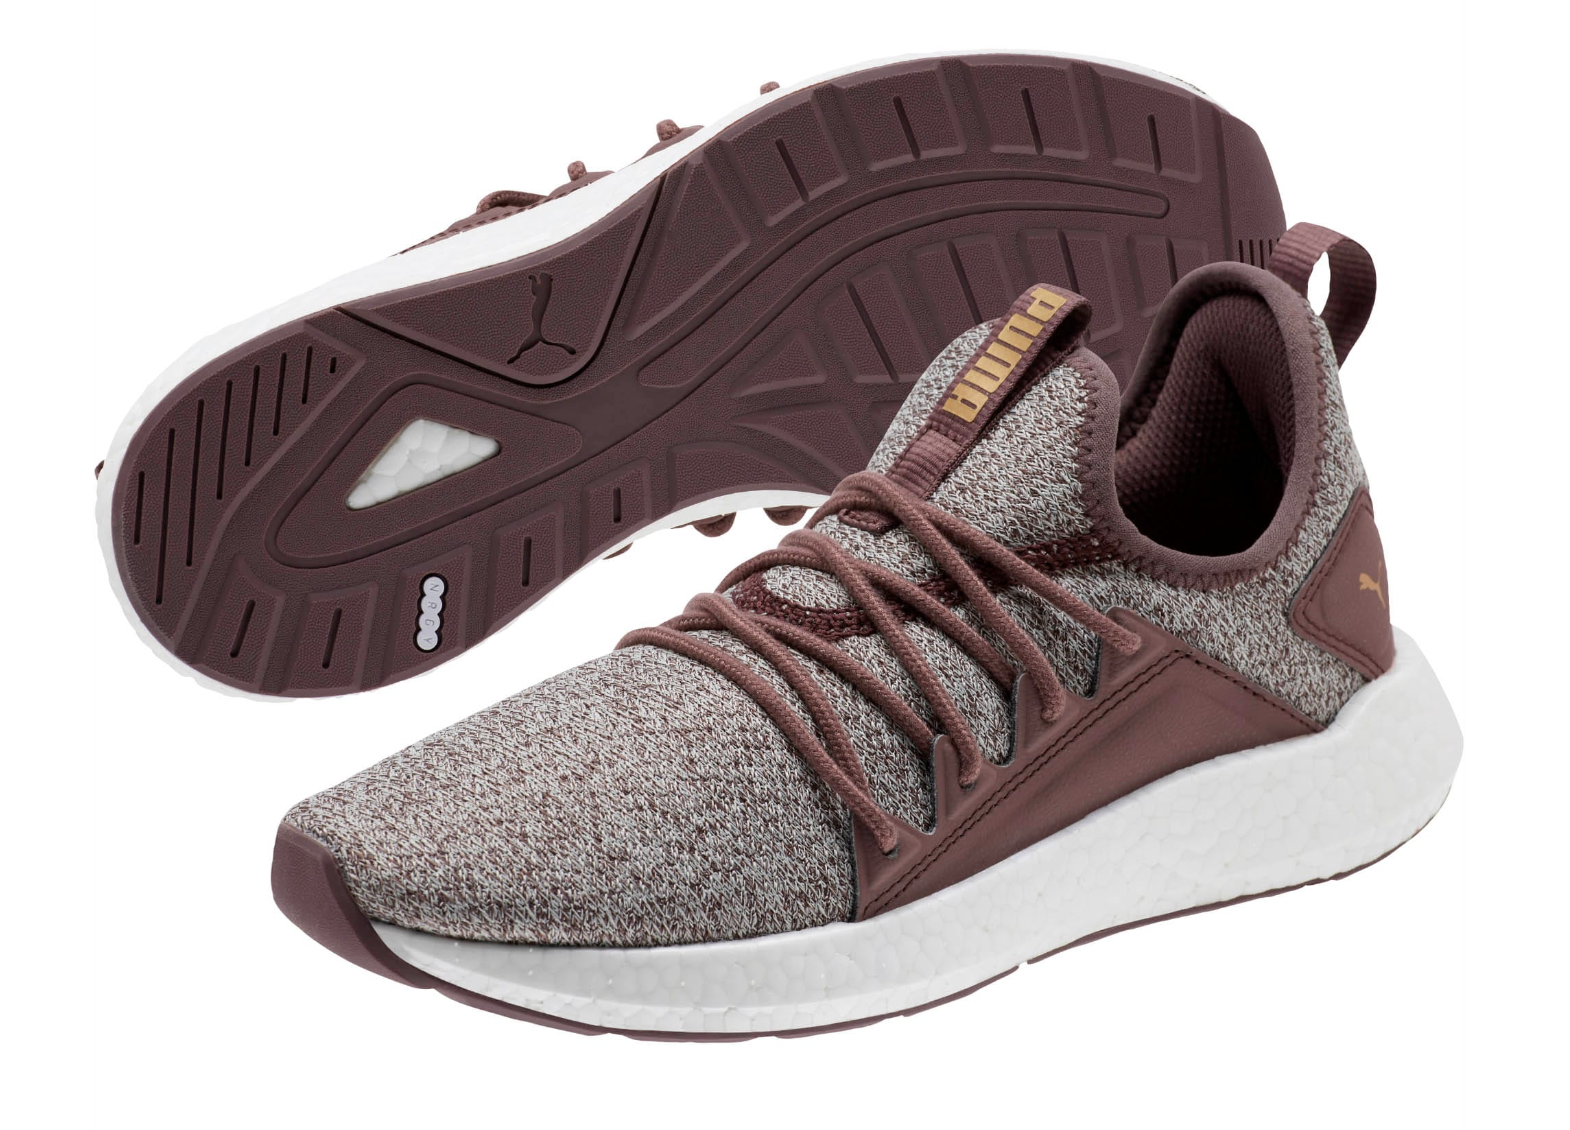 NRGY Neko Knit Women&#x27;s Running Shoes in a reddish brown color